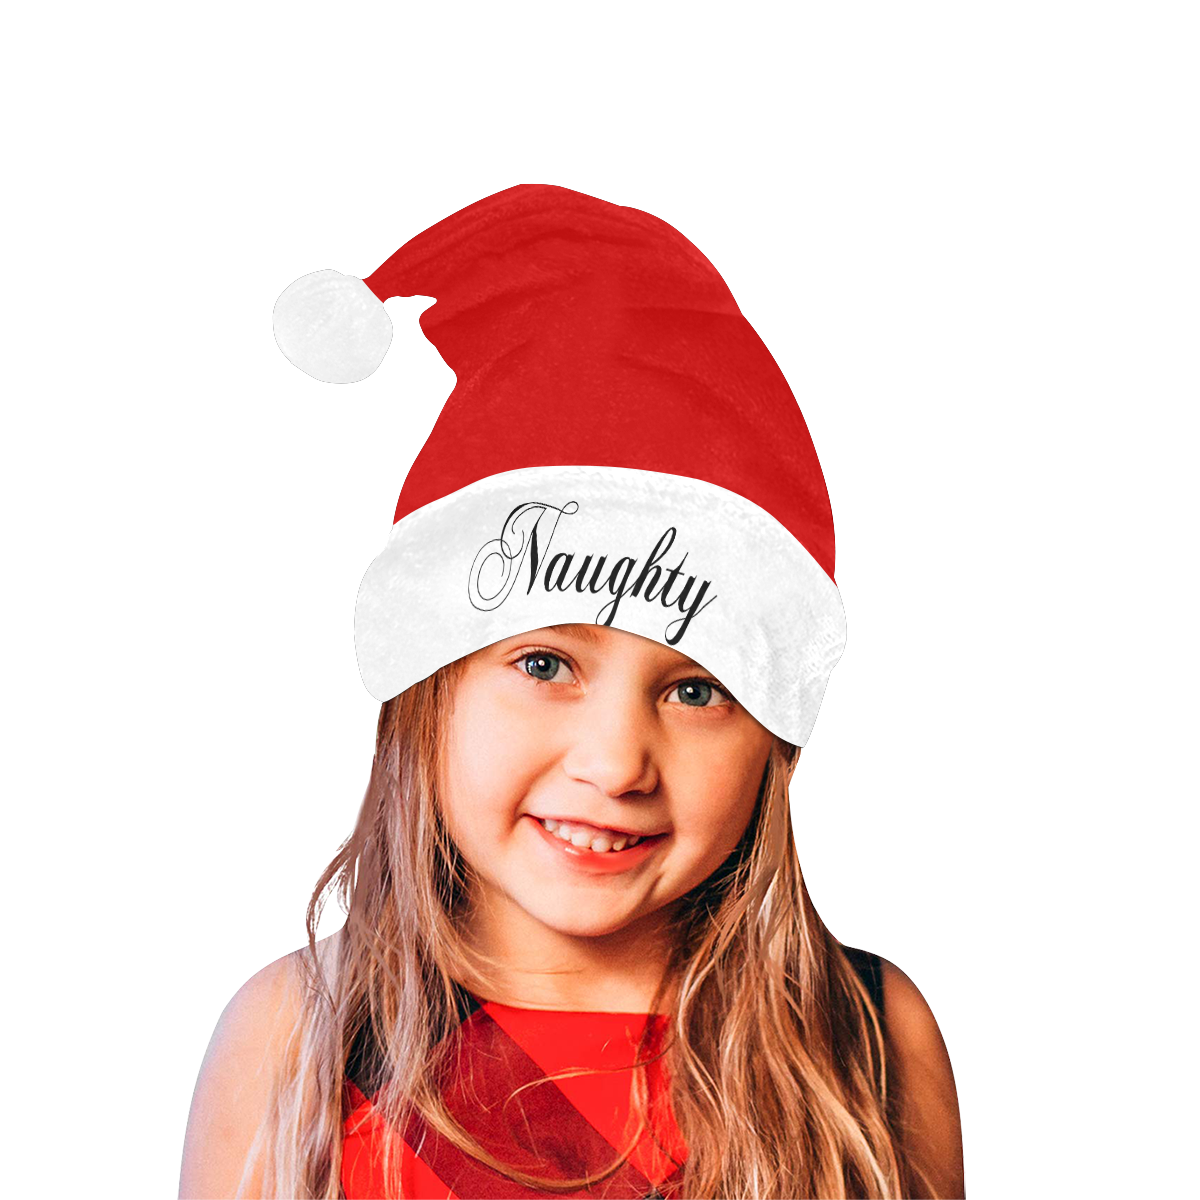 Christmas 'Naughty' (Red and White) Santa Hat